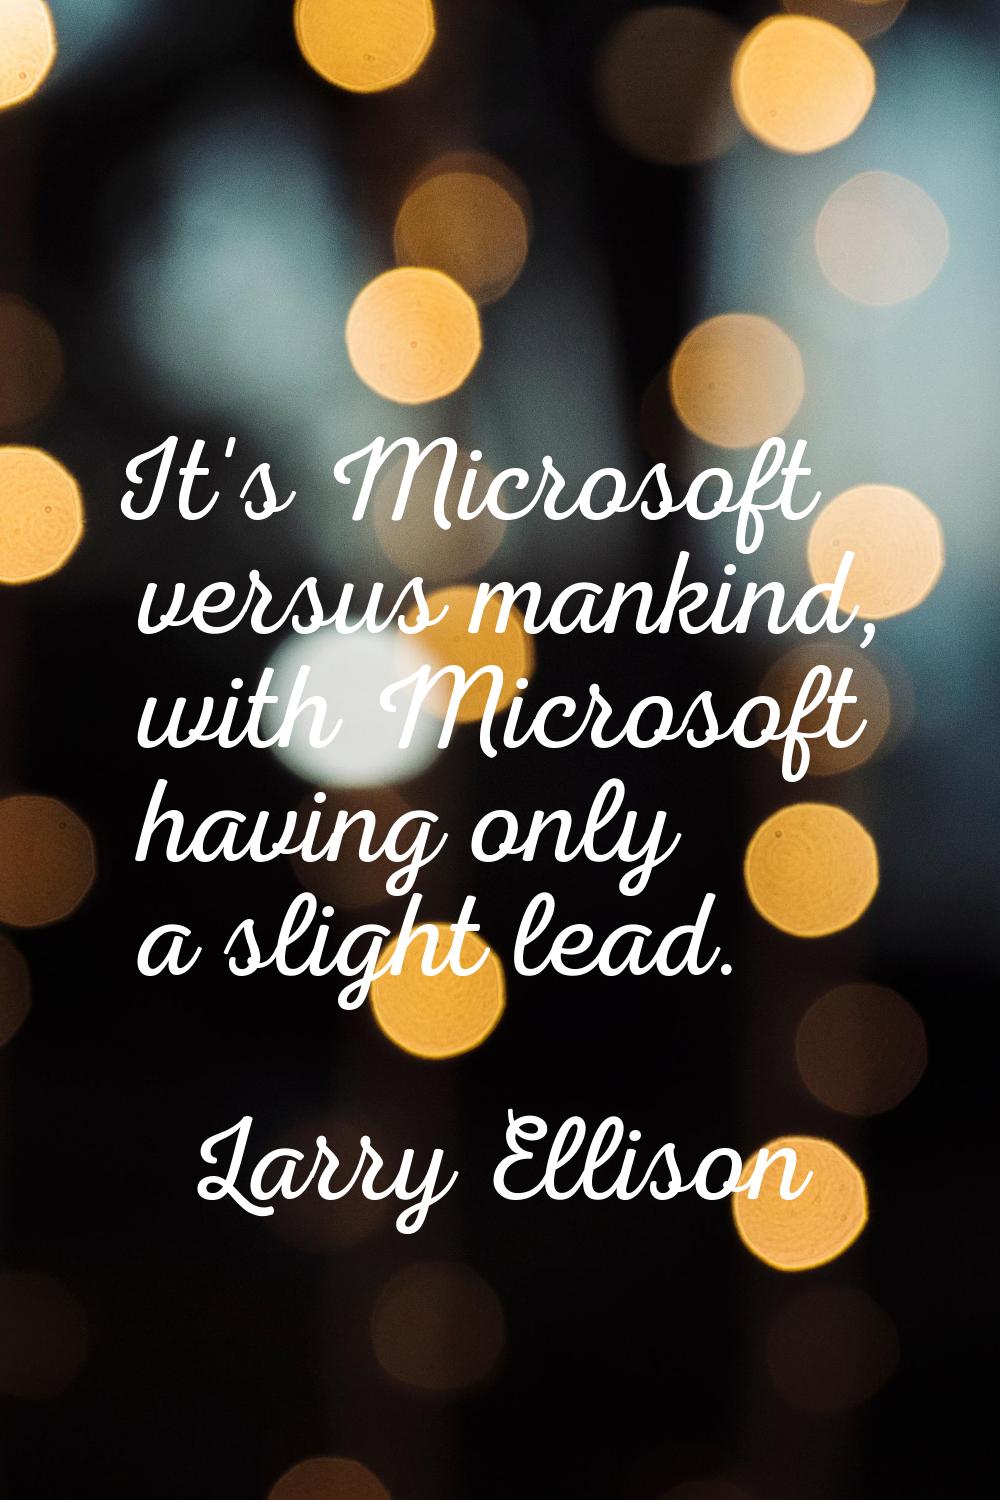 It's Microsoft versus mankind, with Microsoft having only a slight lead.